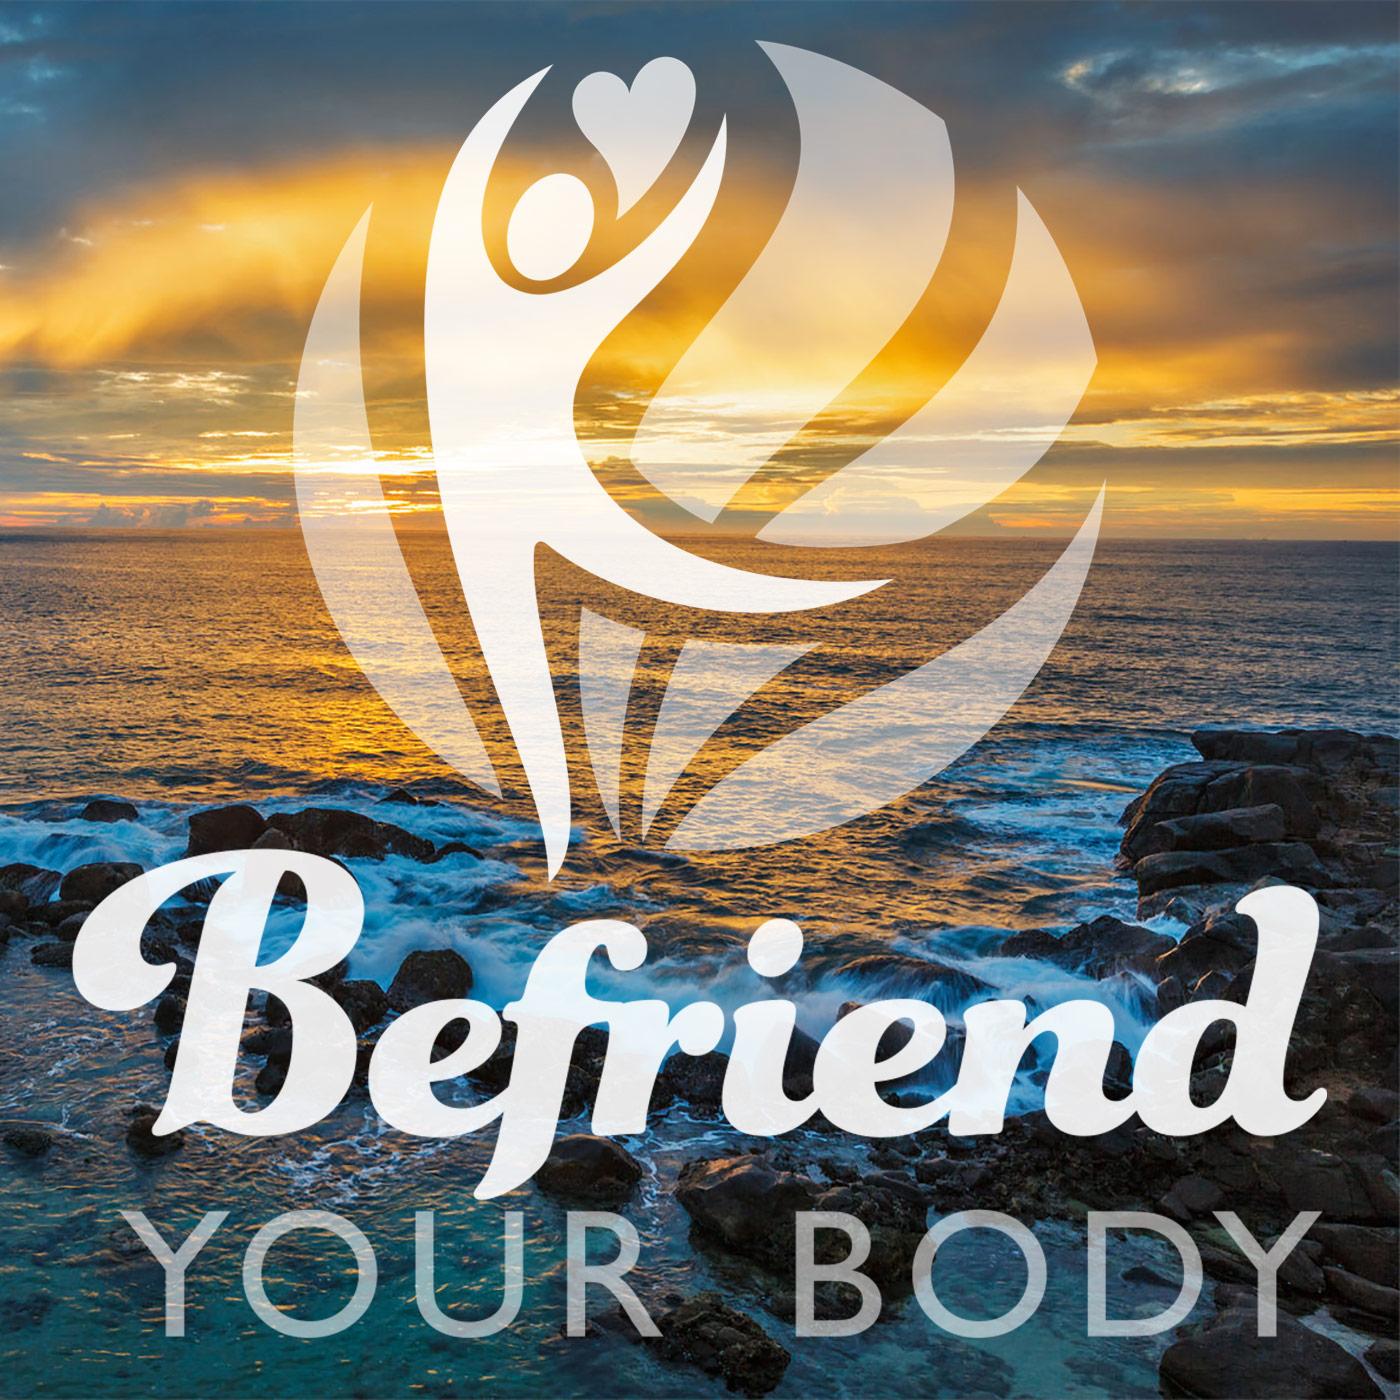 Befriend your body Podcast